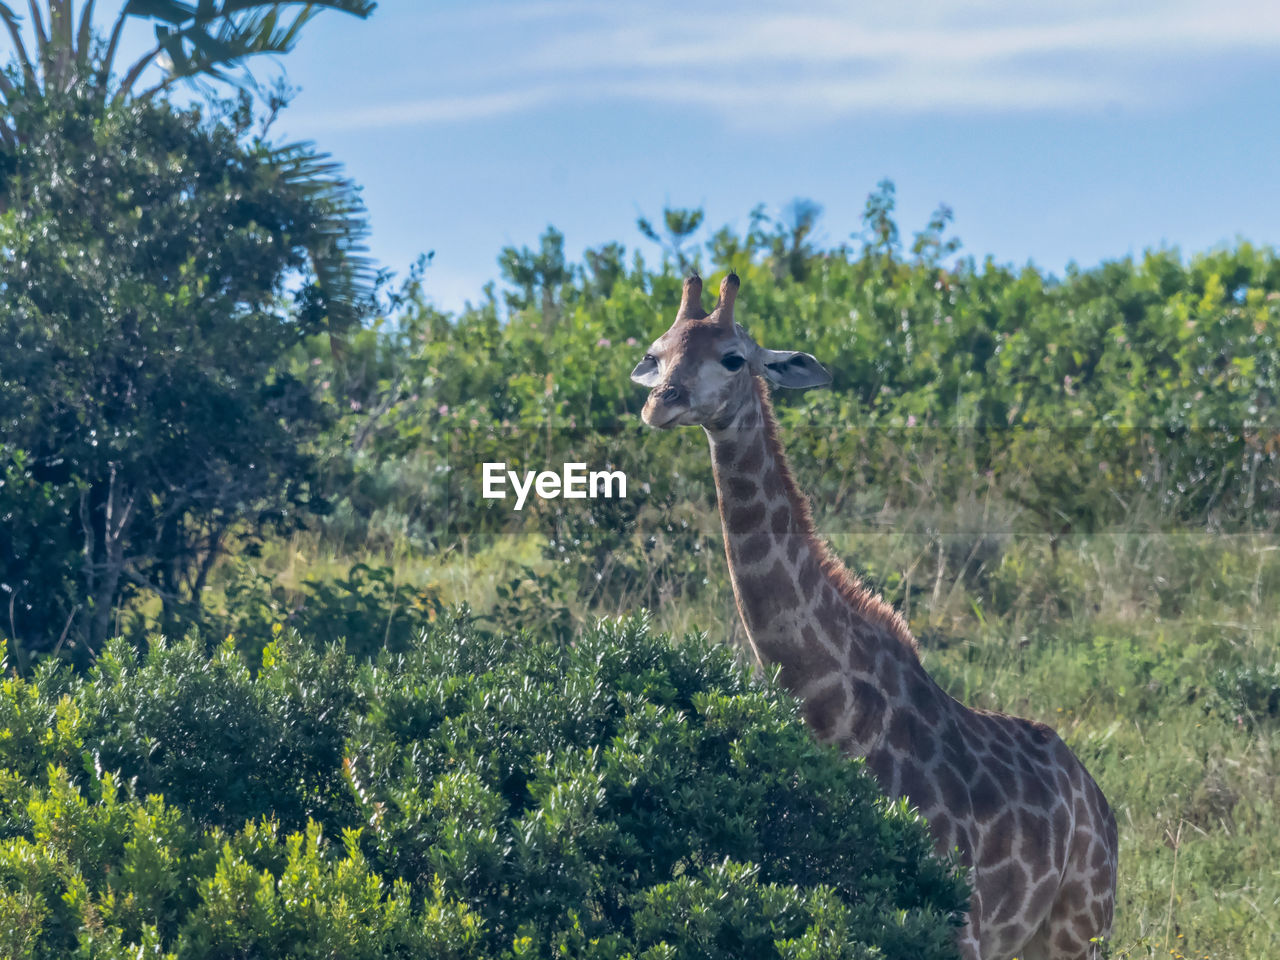 A juvenile giraffe with bushes and sky in the background